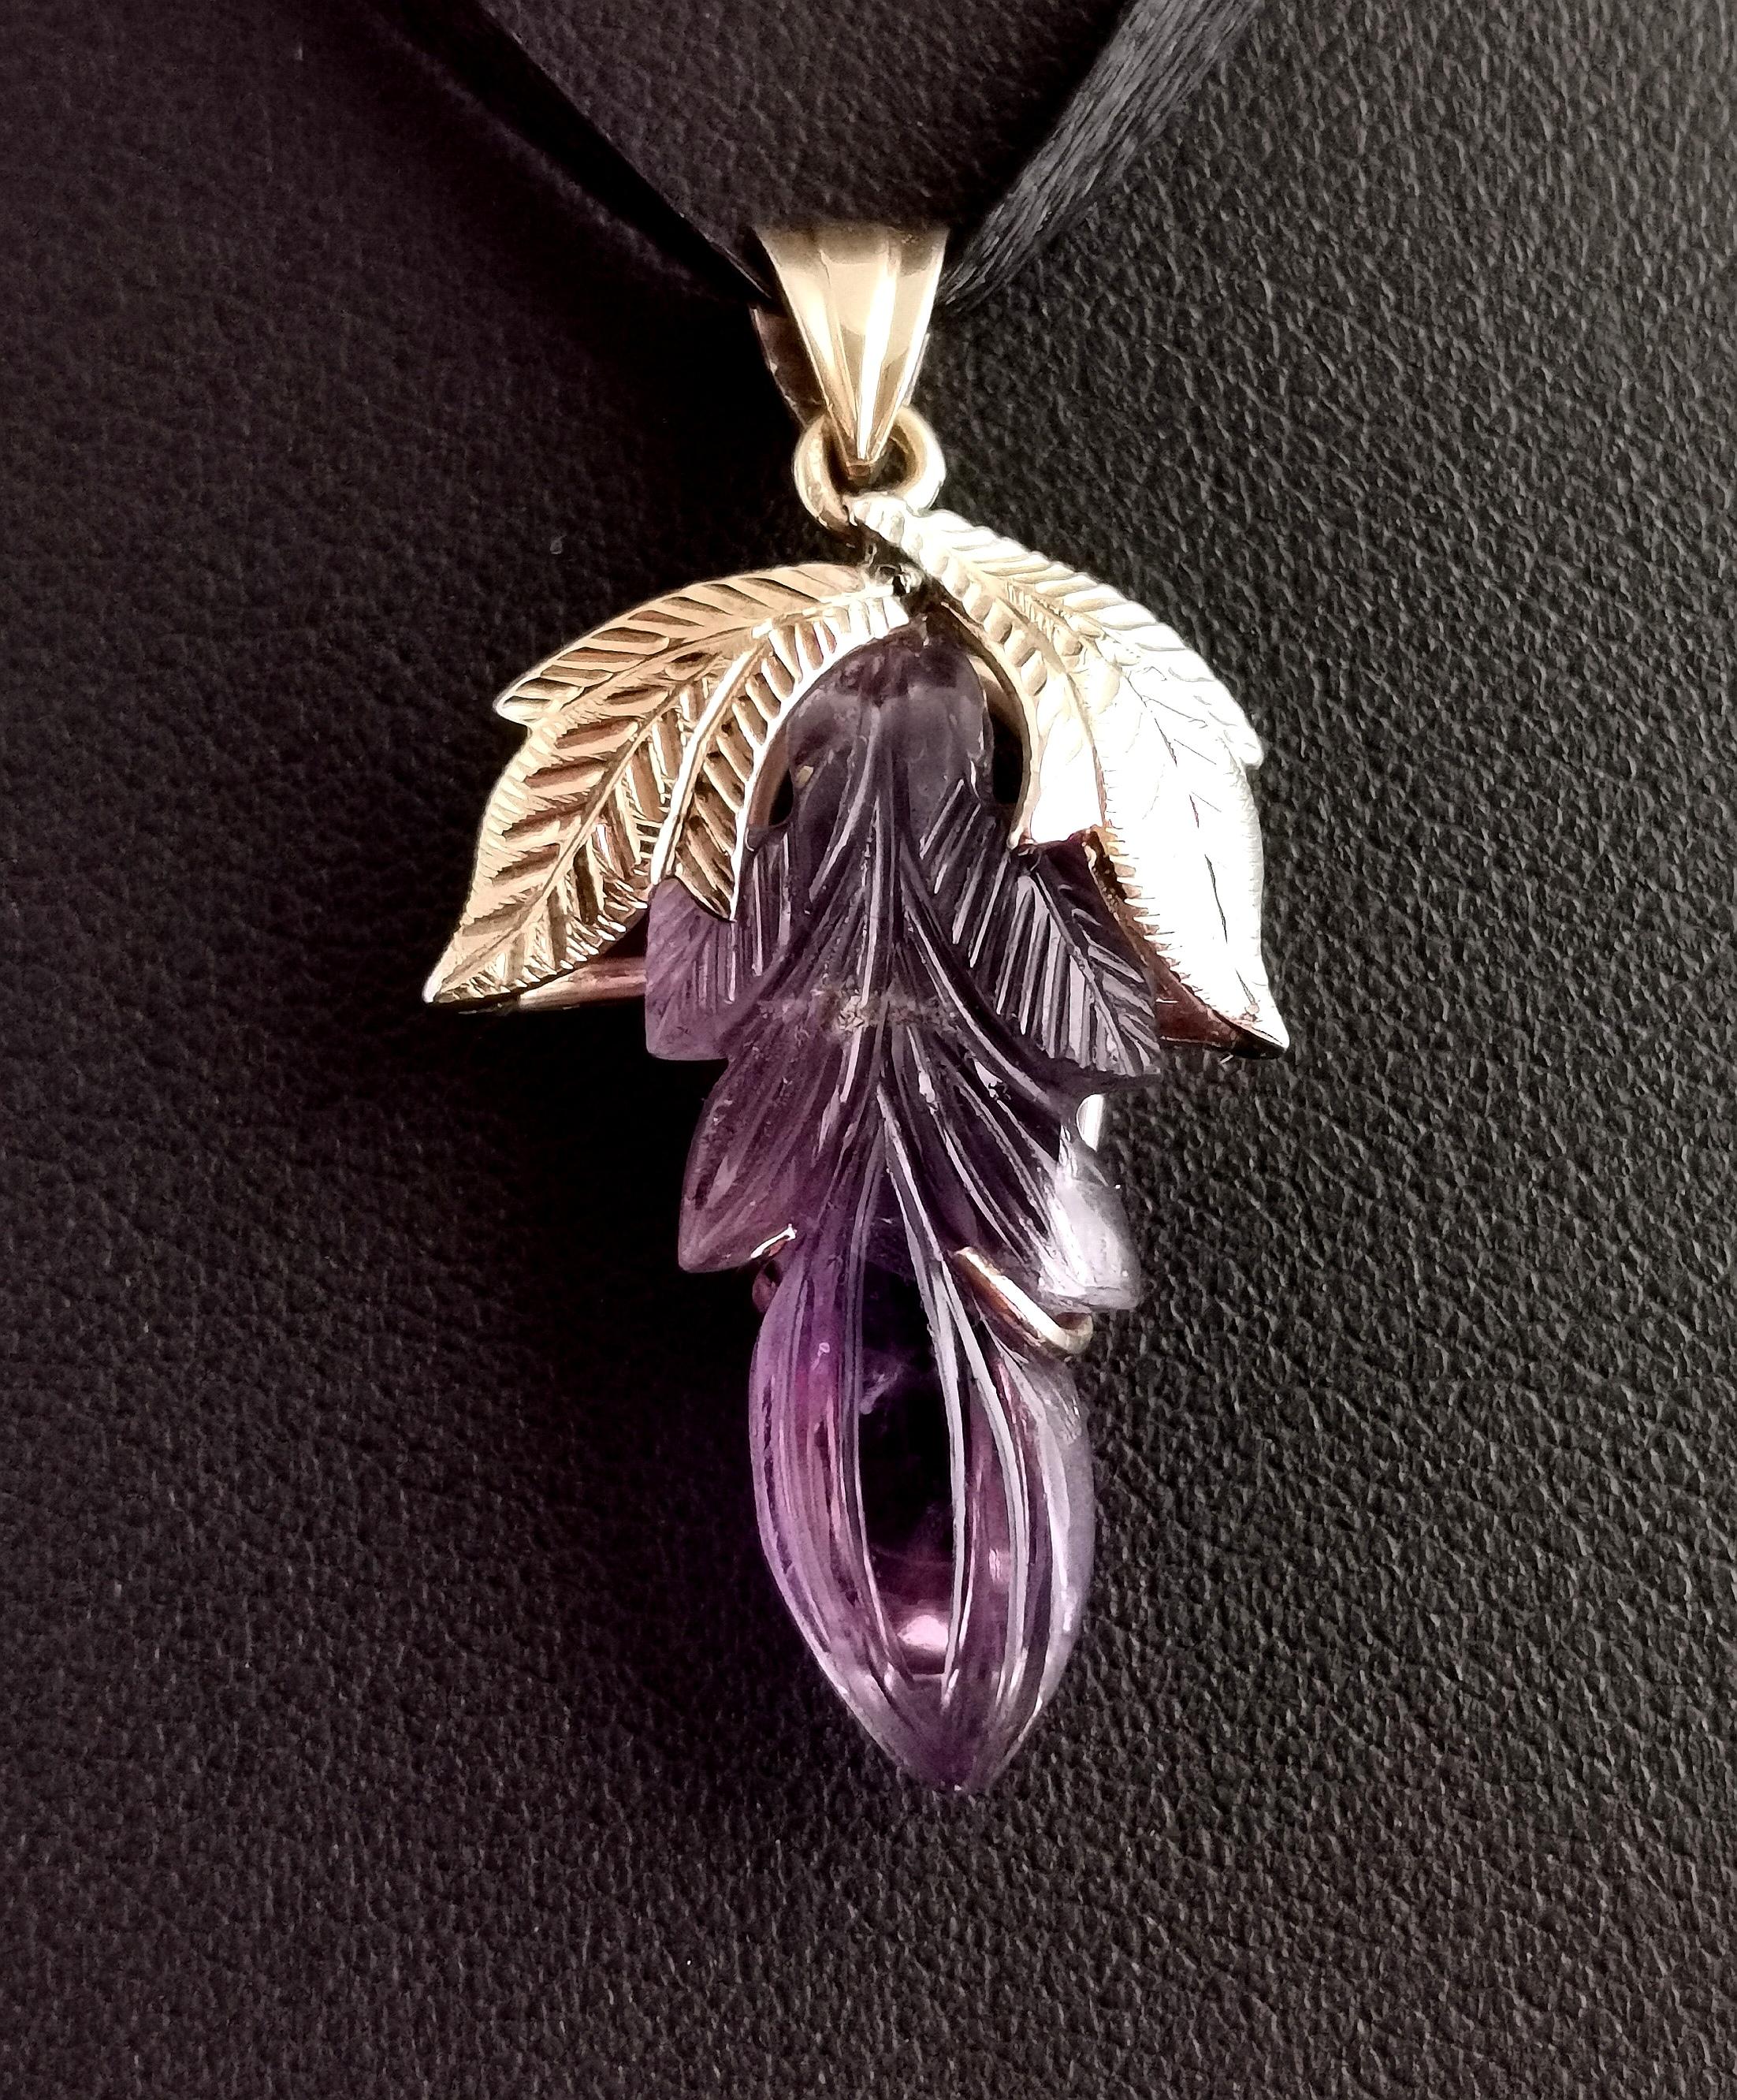 A truly beautiful vintage Amethyst floral pendant in 16k yellow gold.

The pendant has been so intricately carved from a single piece of Amethyst into a floral design with plenty of realistic detailing and natural shapes and contours.

It is mounted